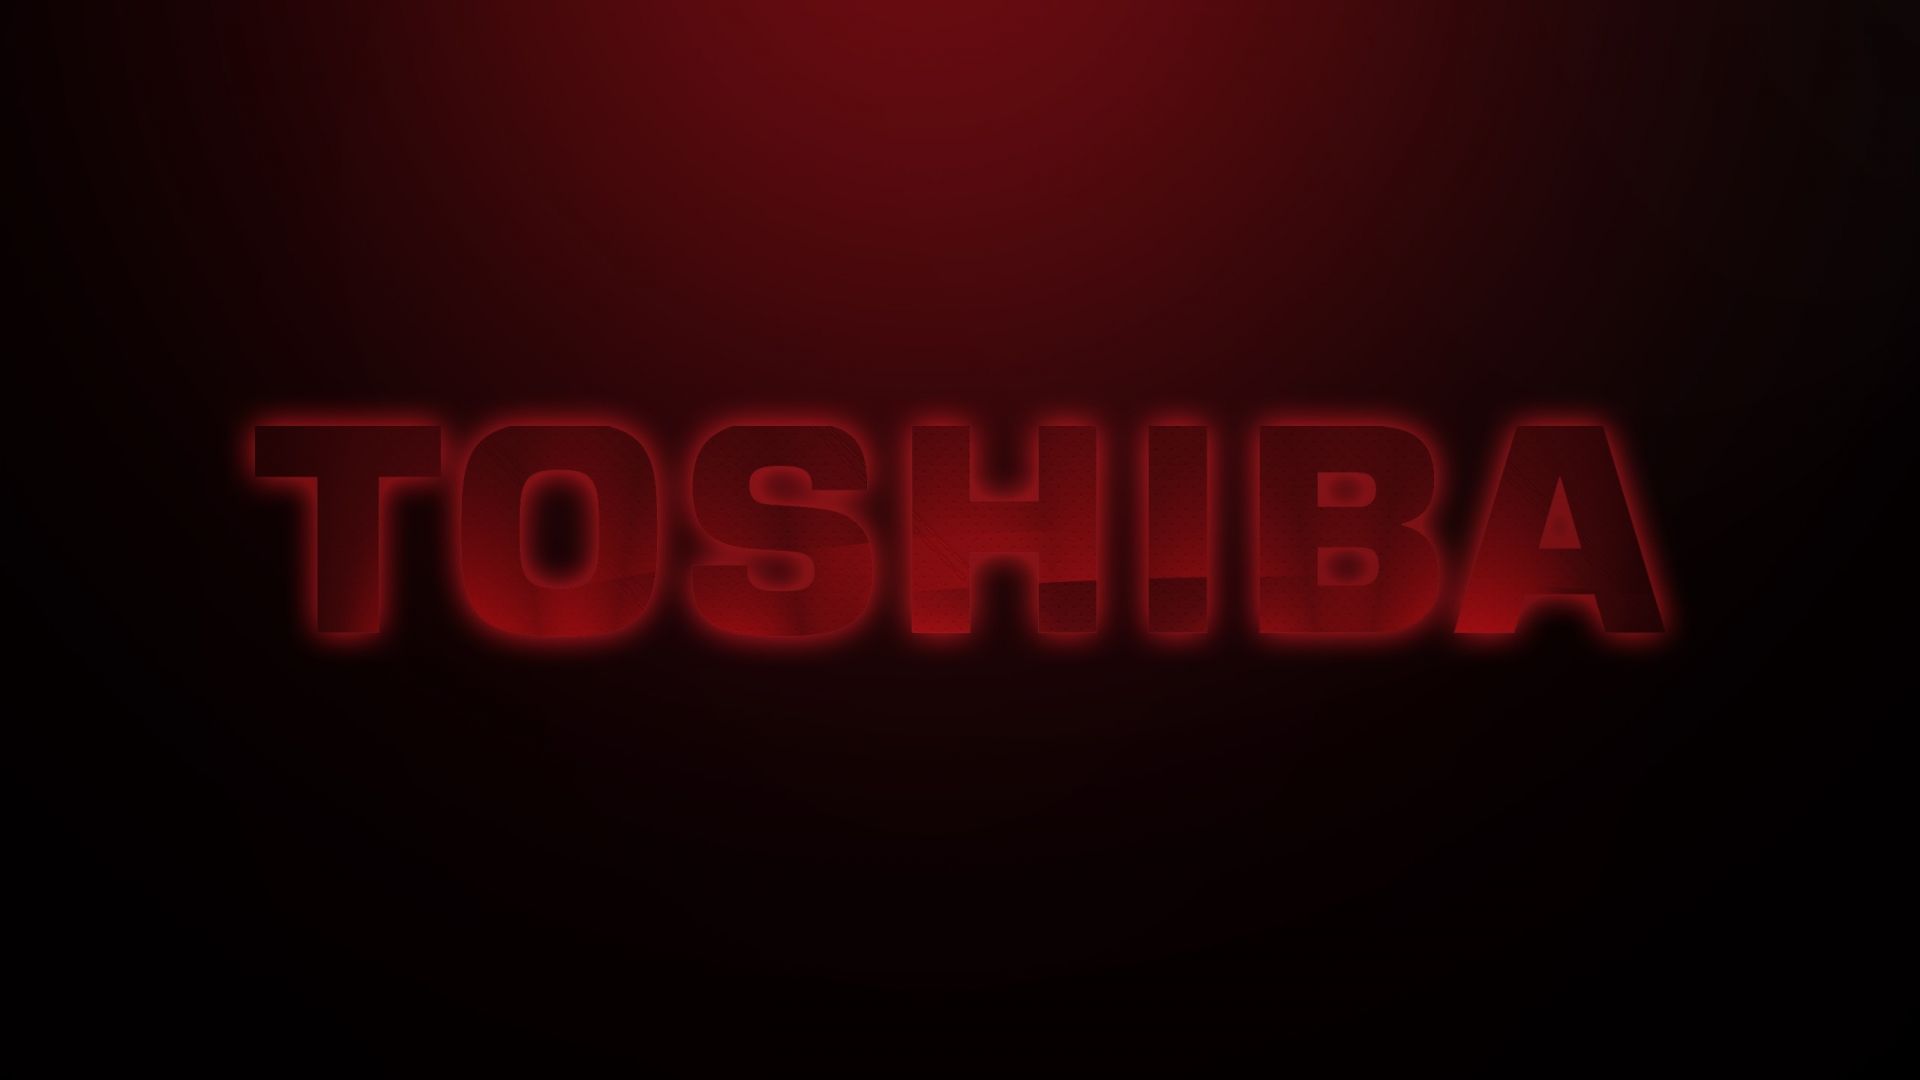 1920x1080 High Definition Wallpaper Hd Wallpaper Toshiba Red Style